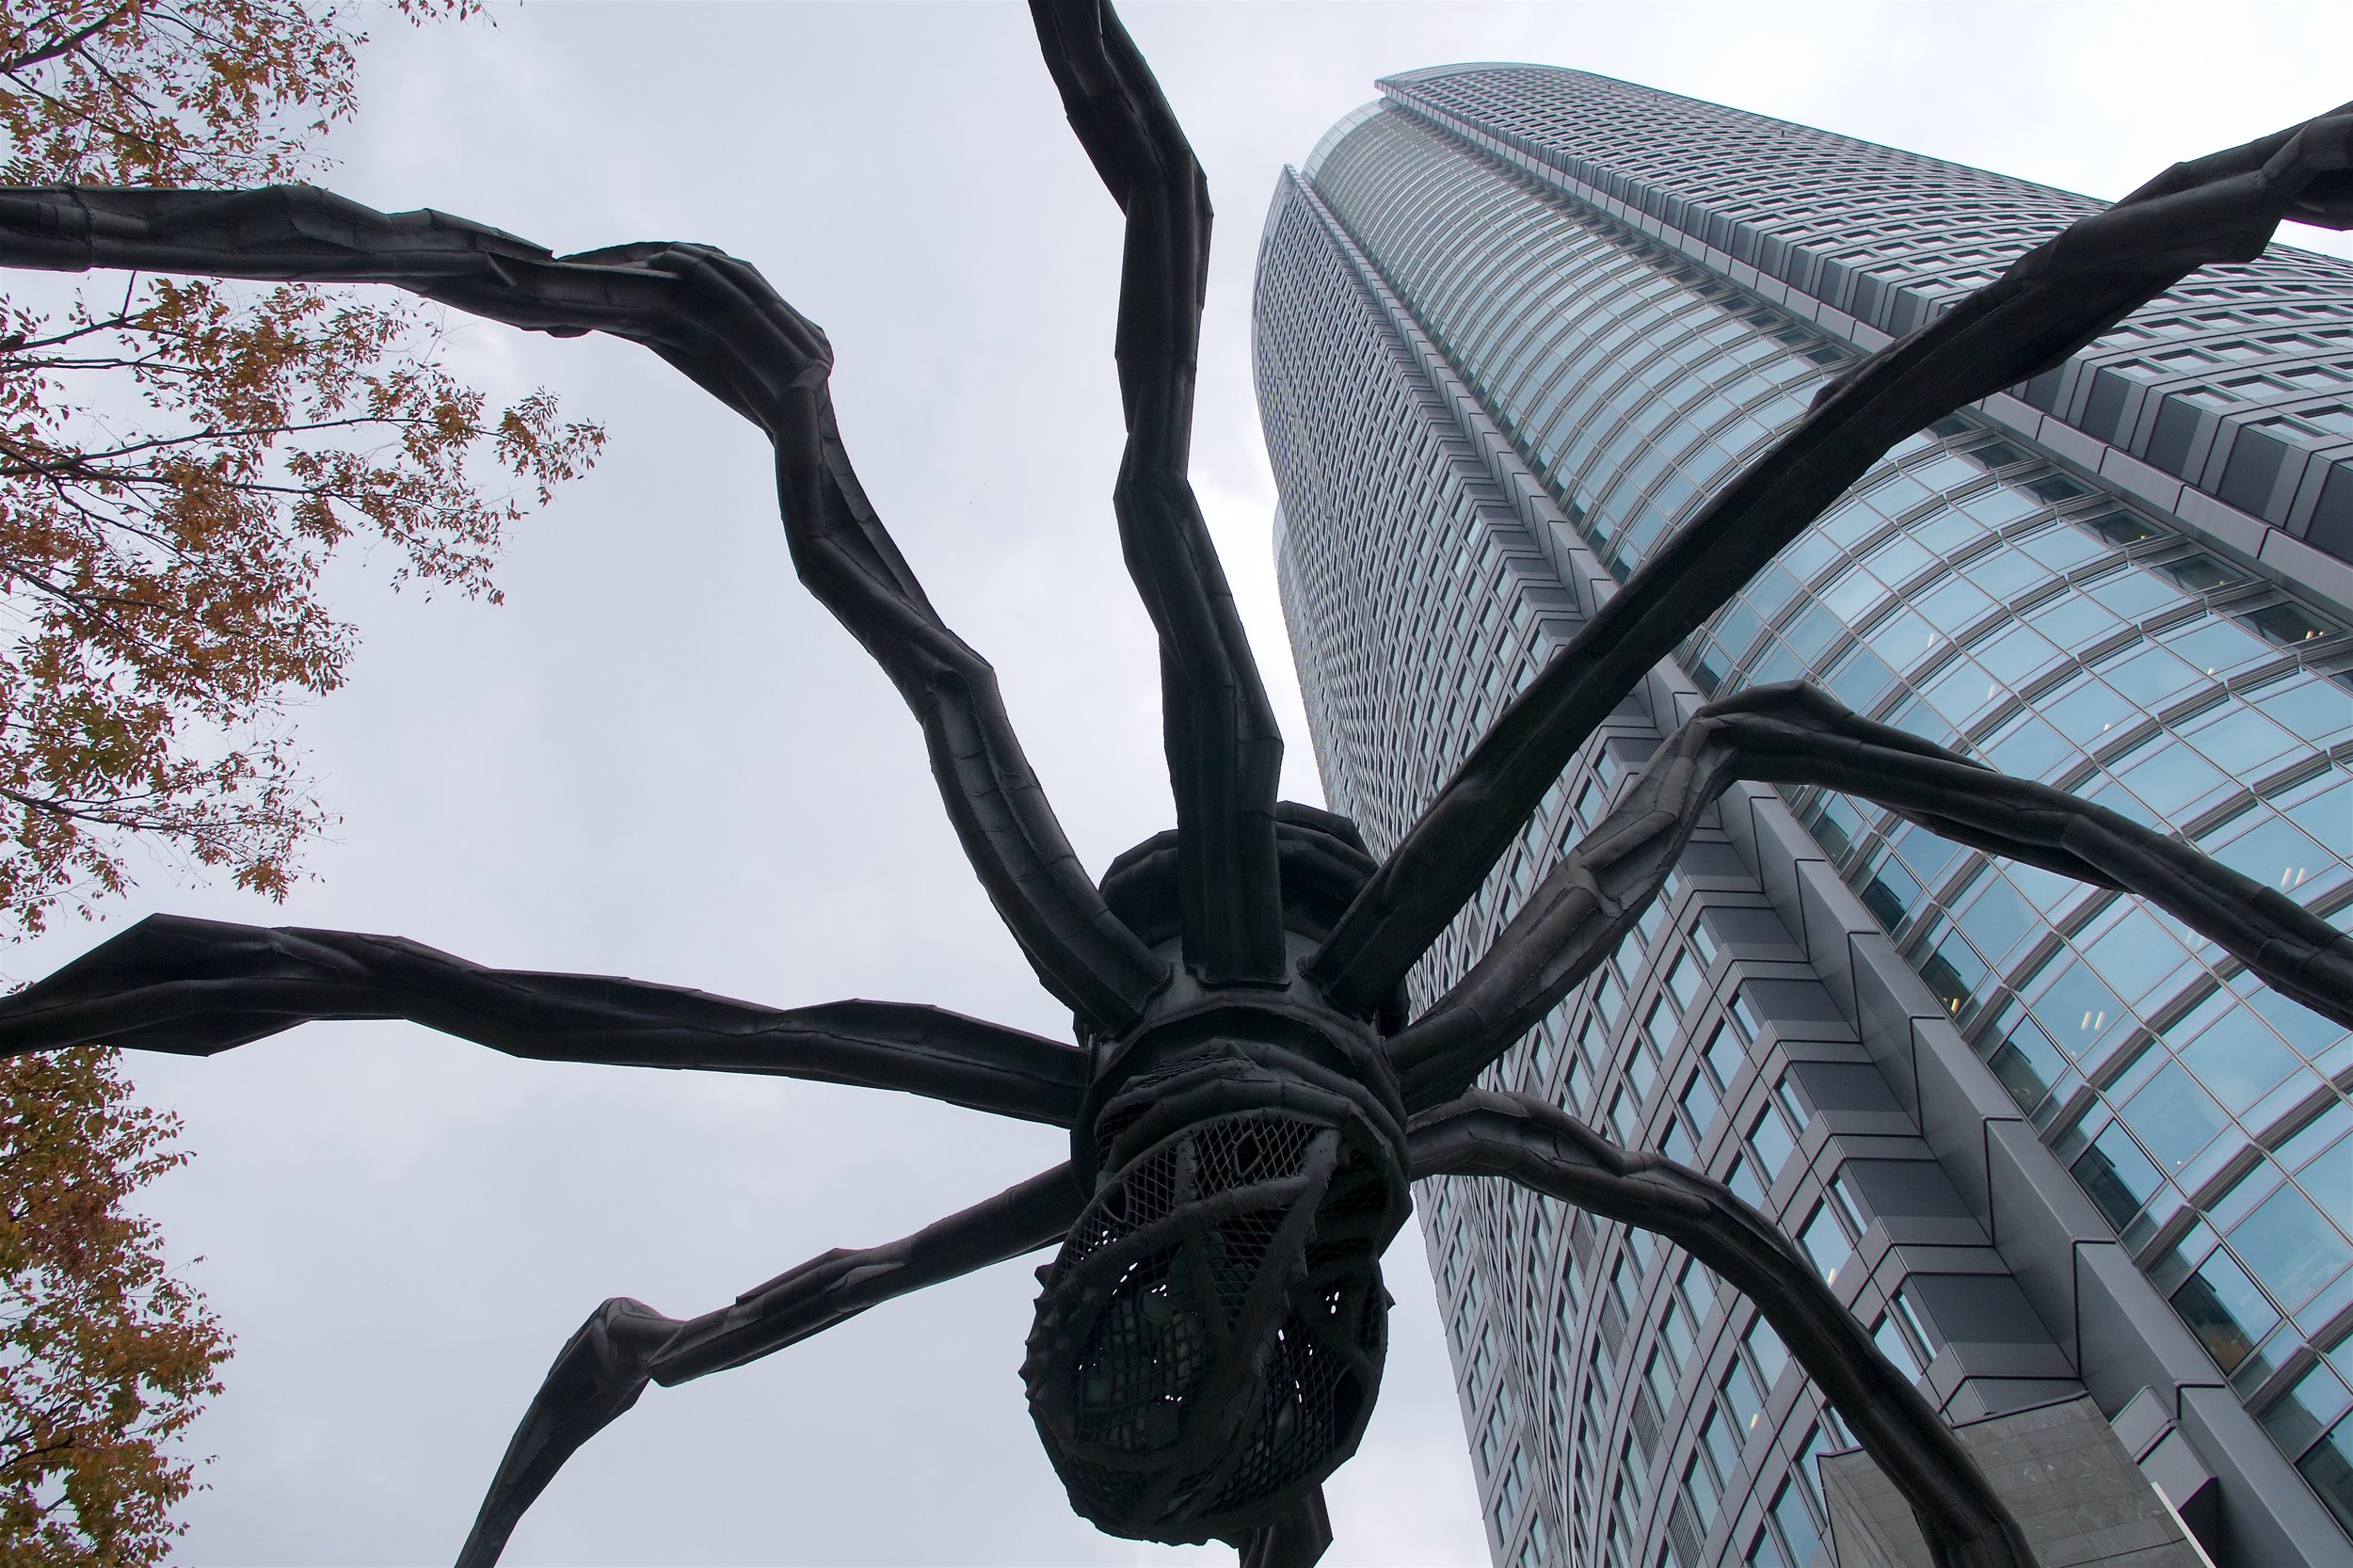  This spider sculpture, Maman, covers a big section of the Roppongi HIlls plaza 